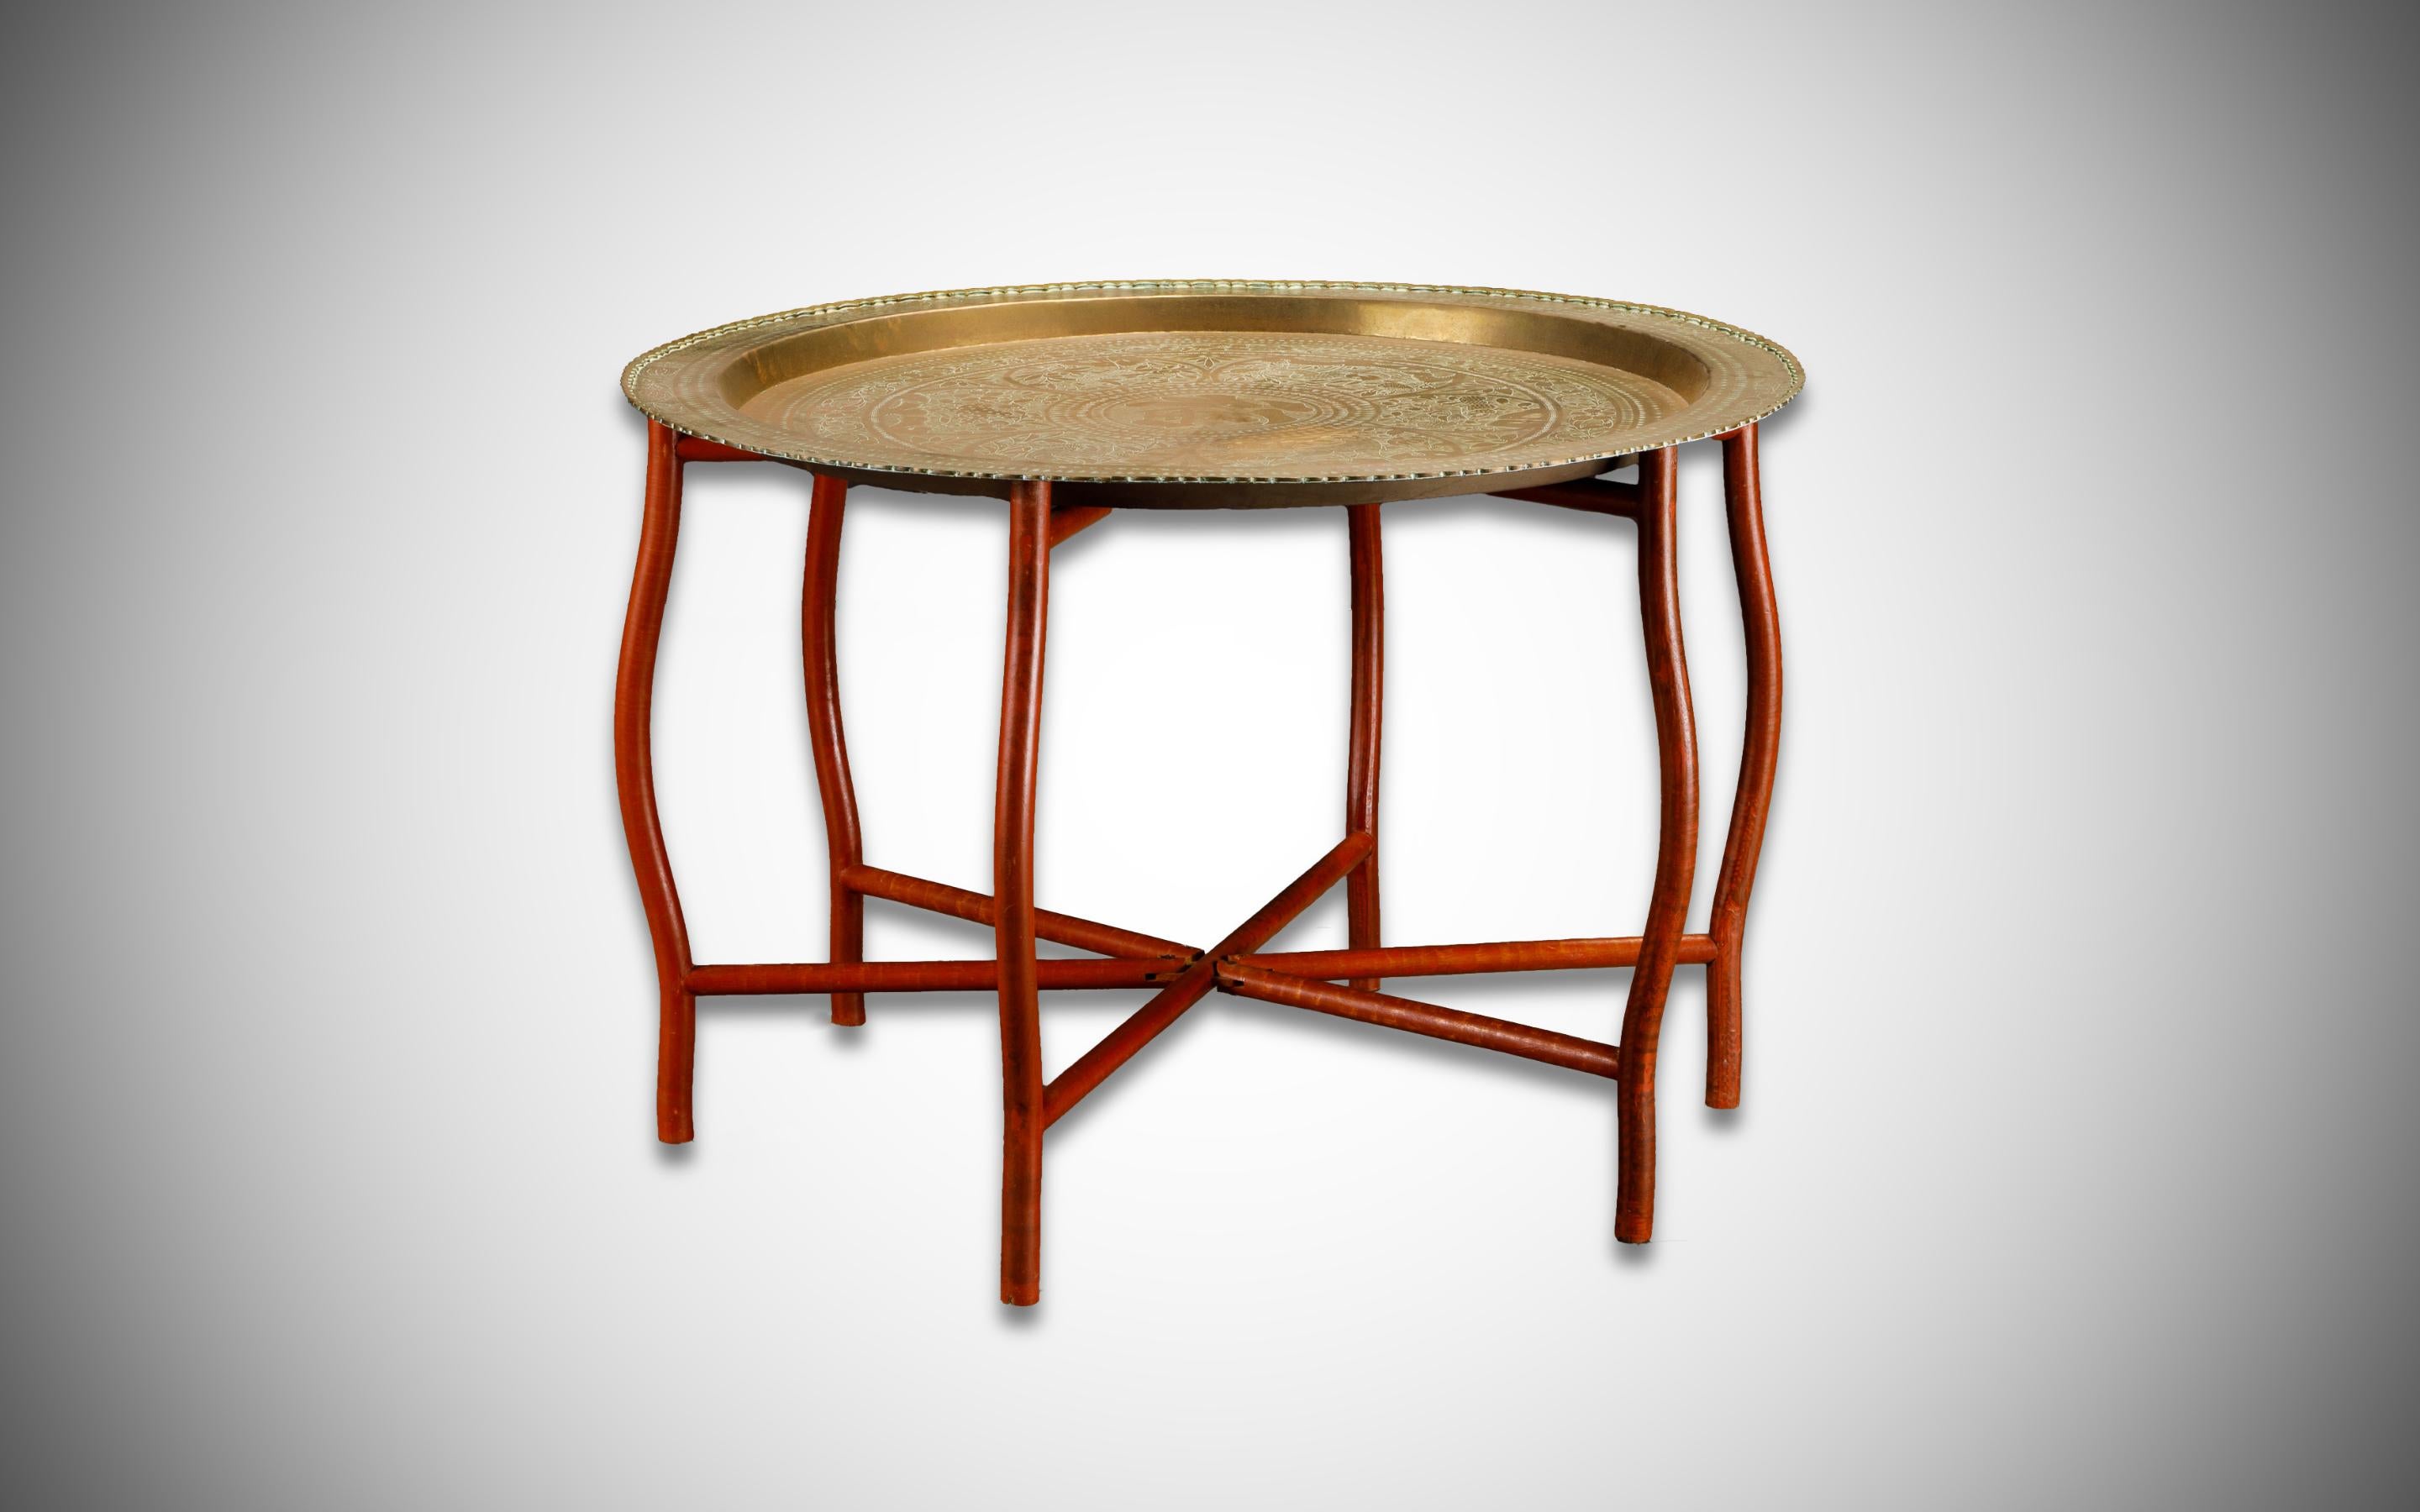 Mid-Century Modern Asian Engraved and Hammered Brass Tray Table with Foldable Wood Base, c 1960s